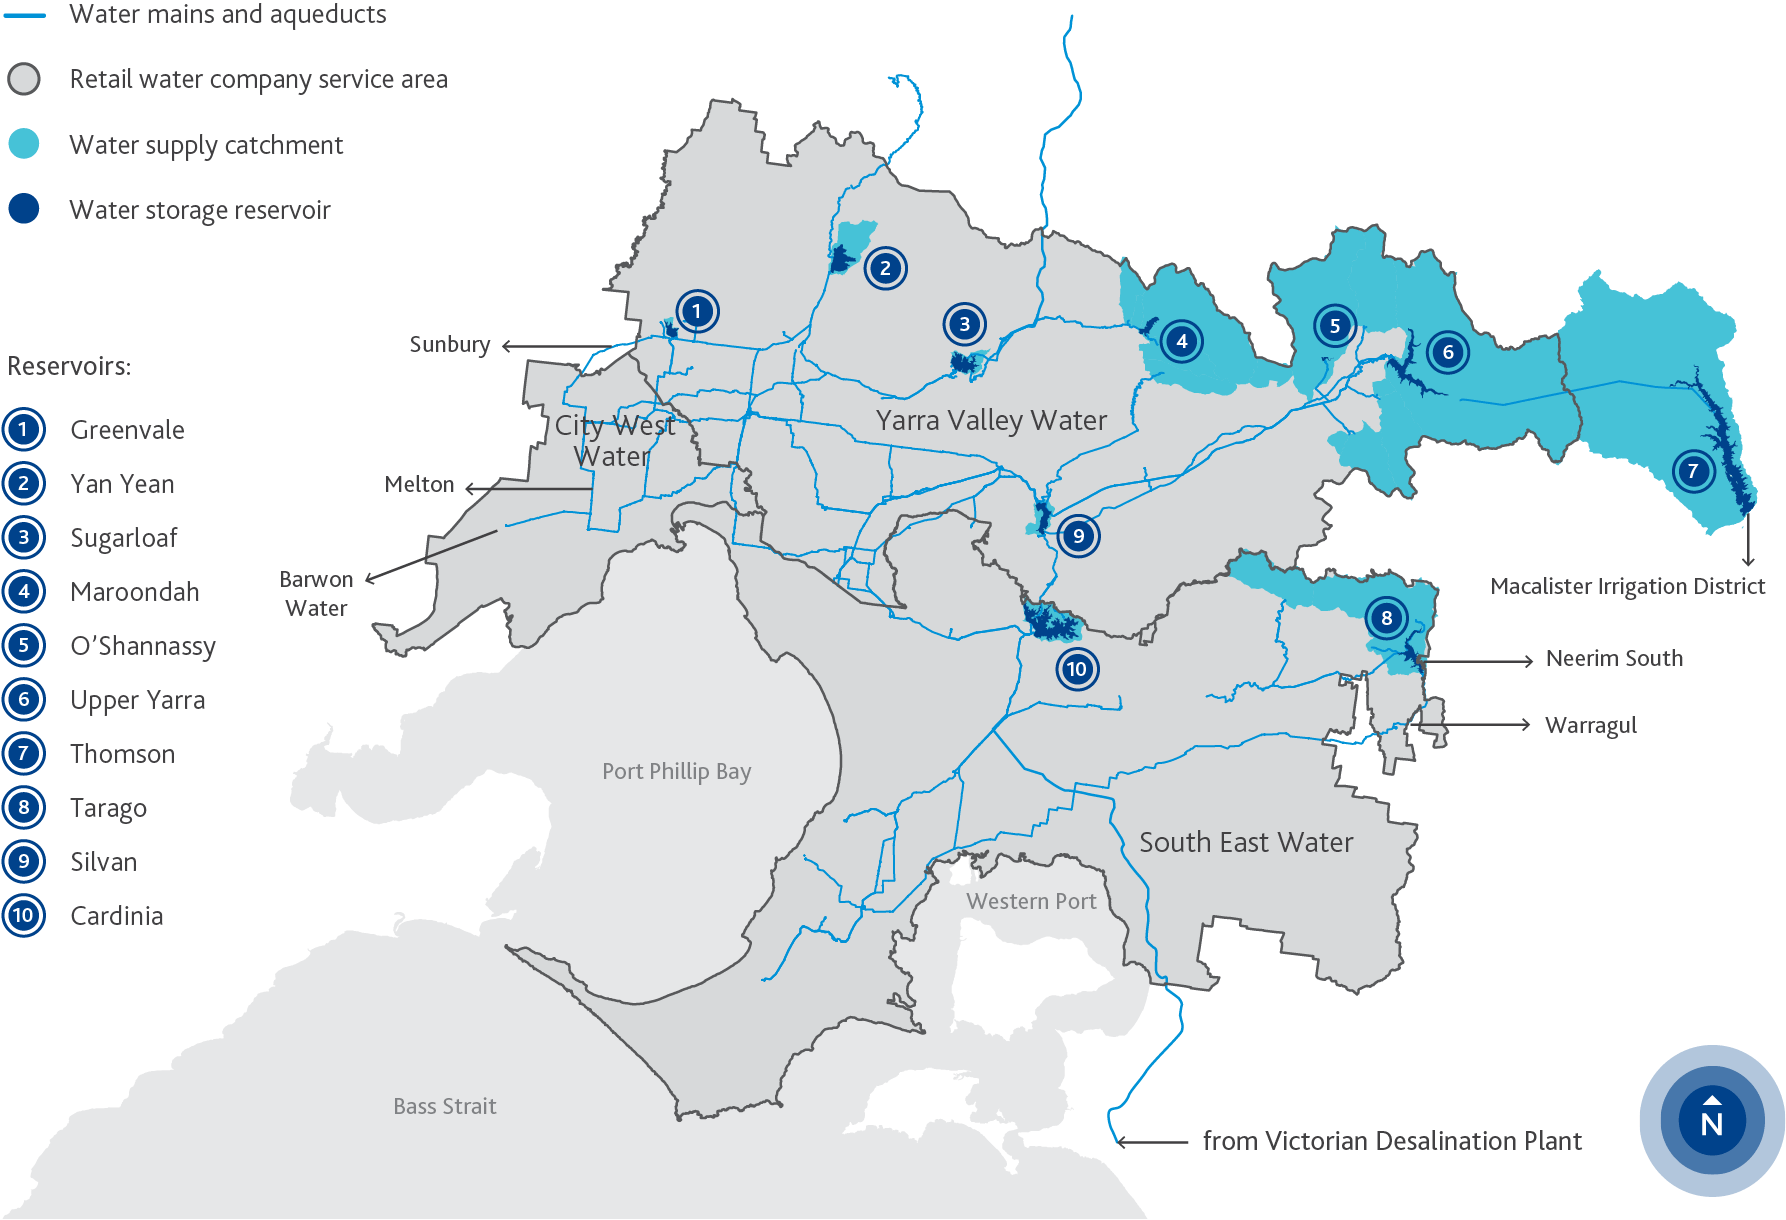 Map of Melbourne's major water reservoirs, mains and aqueducts.